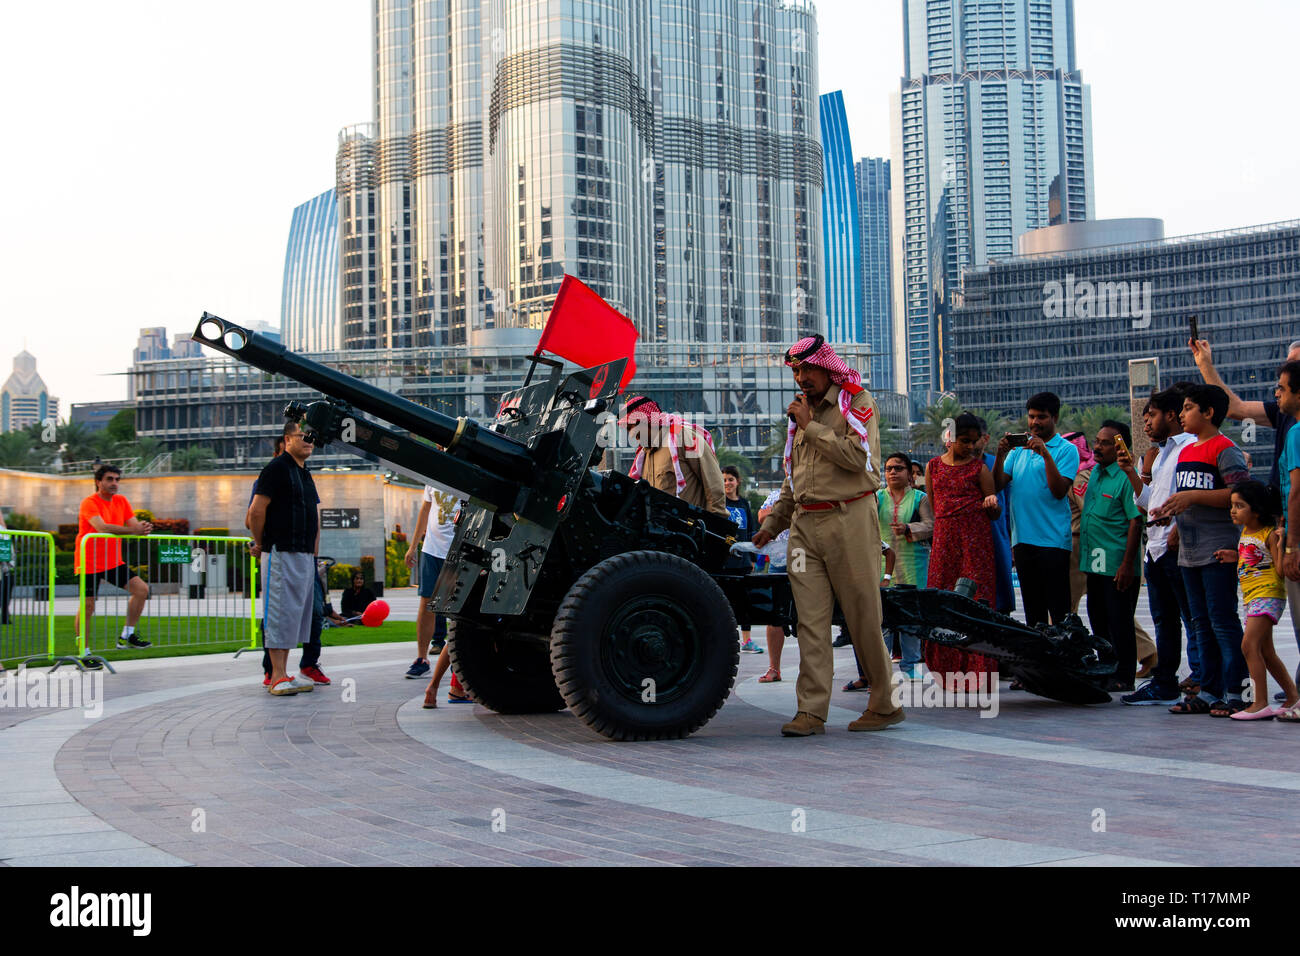 Dubai, United Arab Emirates - May 18, 2018: Ramadan Canon and soldiers in front of Burj Khalifa and the Dubai mall fountain to signal the end of the d Stock Photo